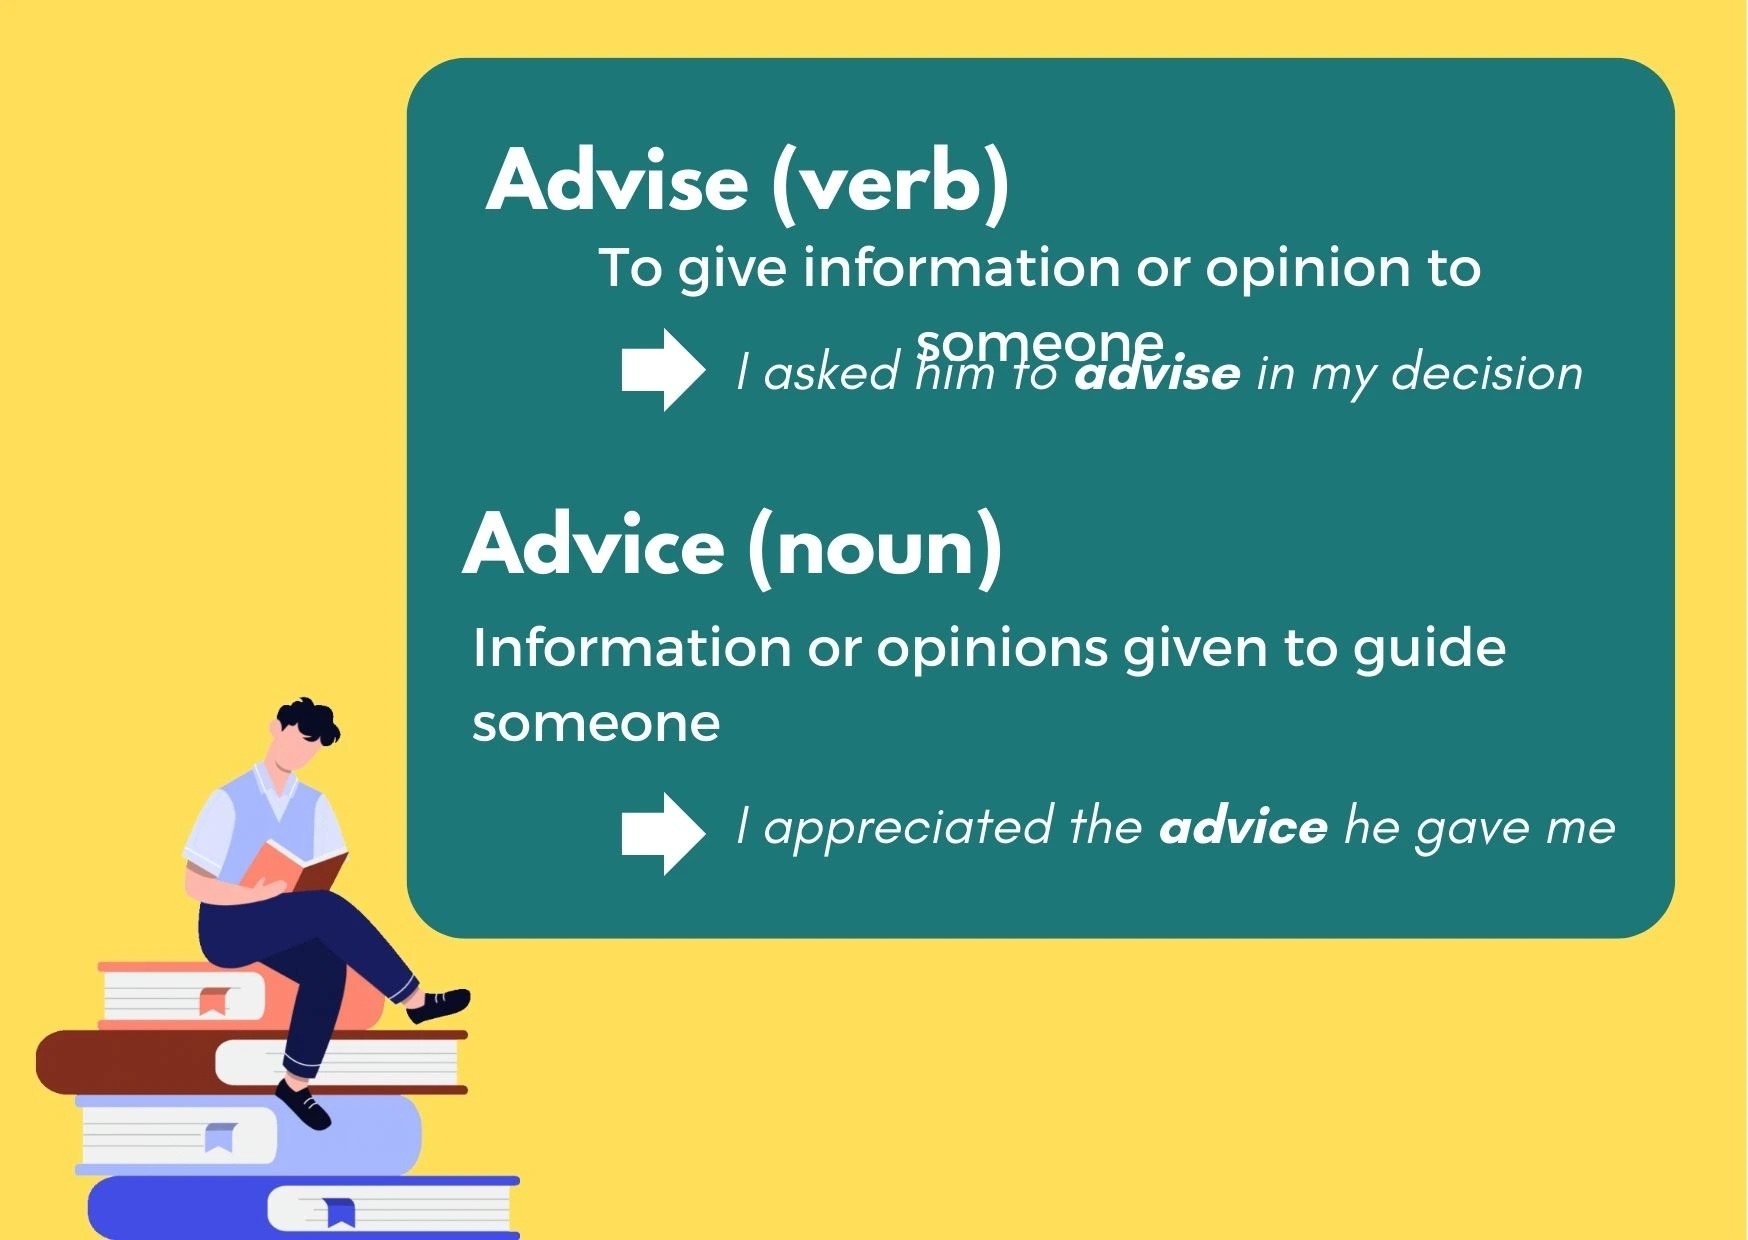 A graphic detailing the difference between the verb Advise - the act of giving information or opinion and Advice (noun) - the information or opinion given